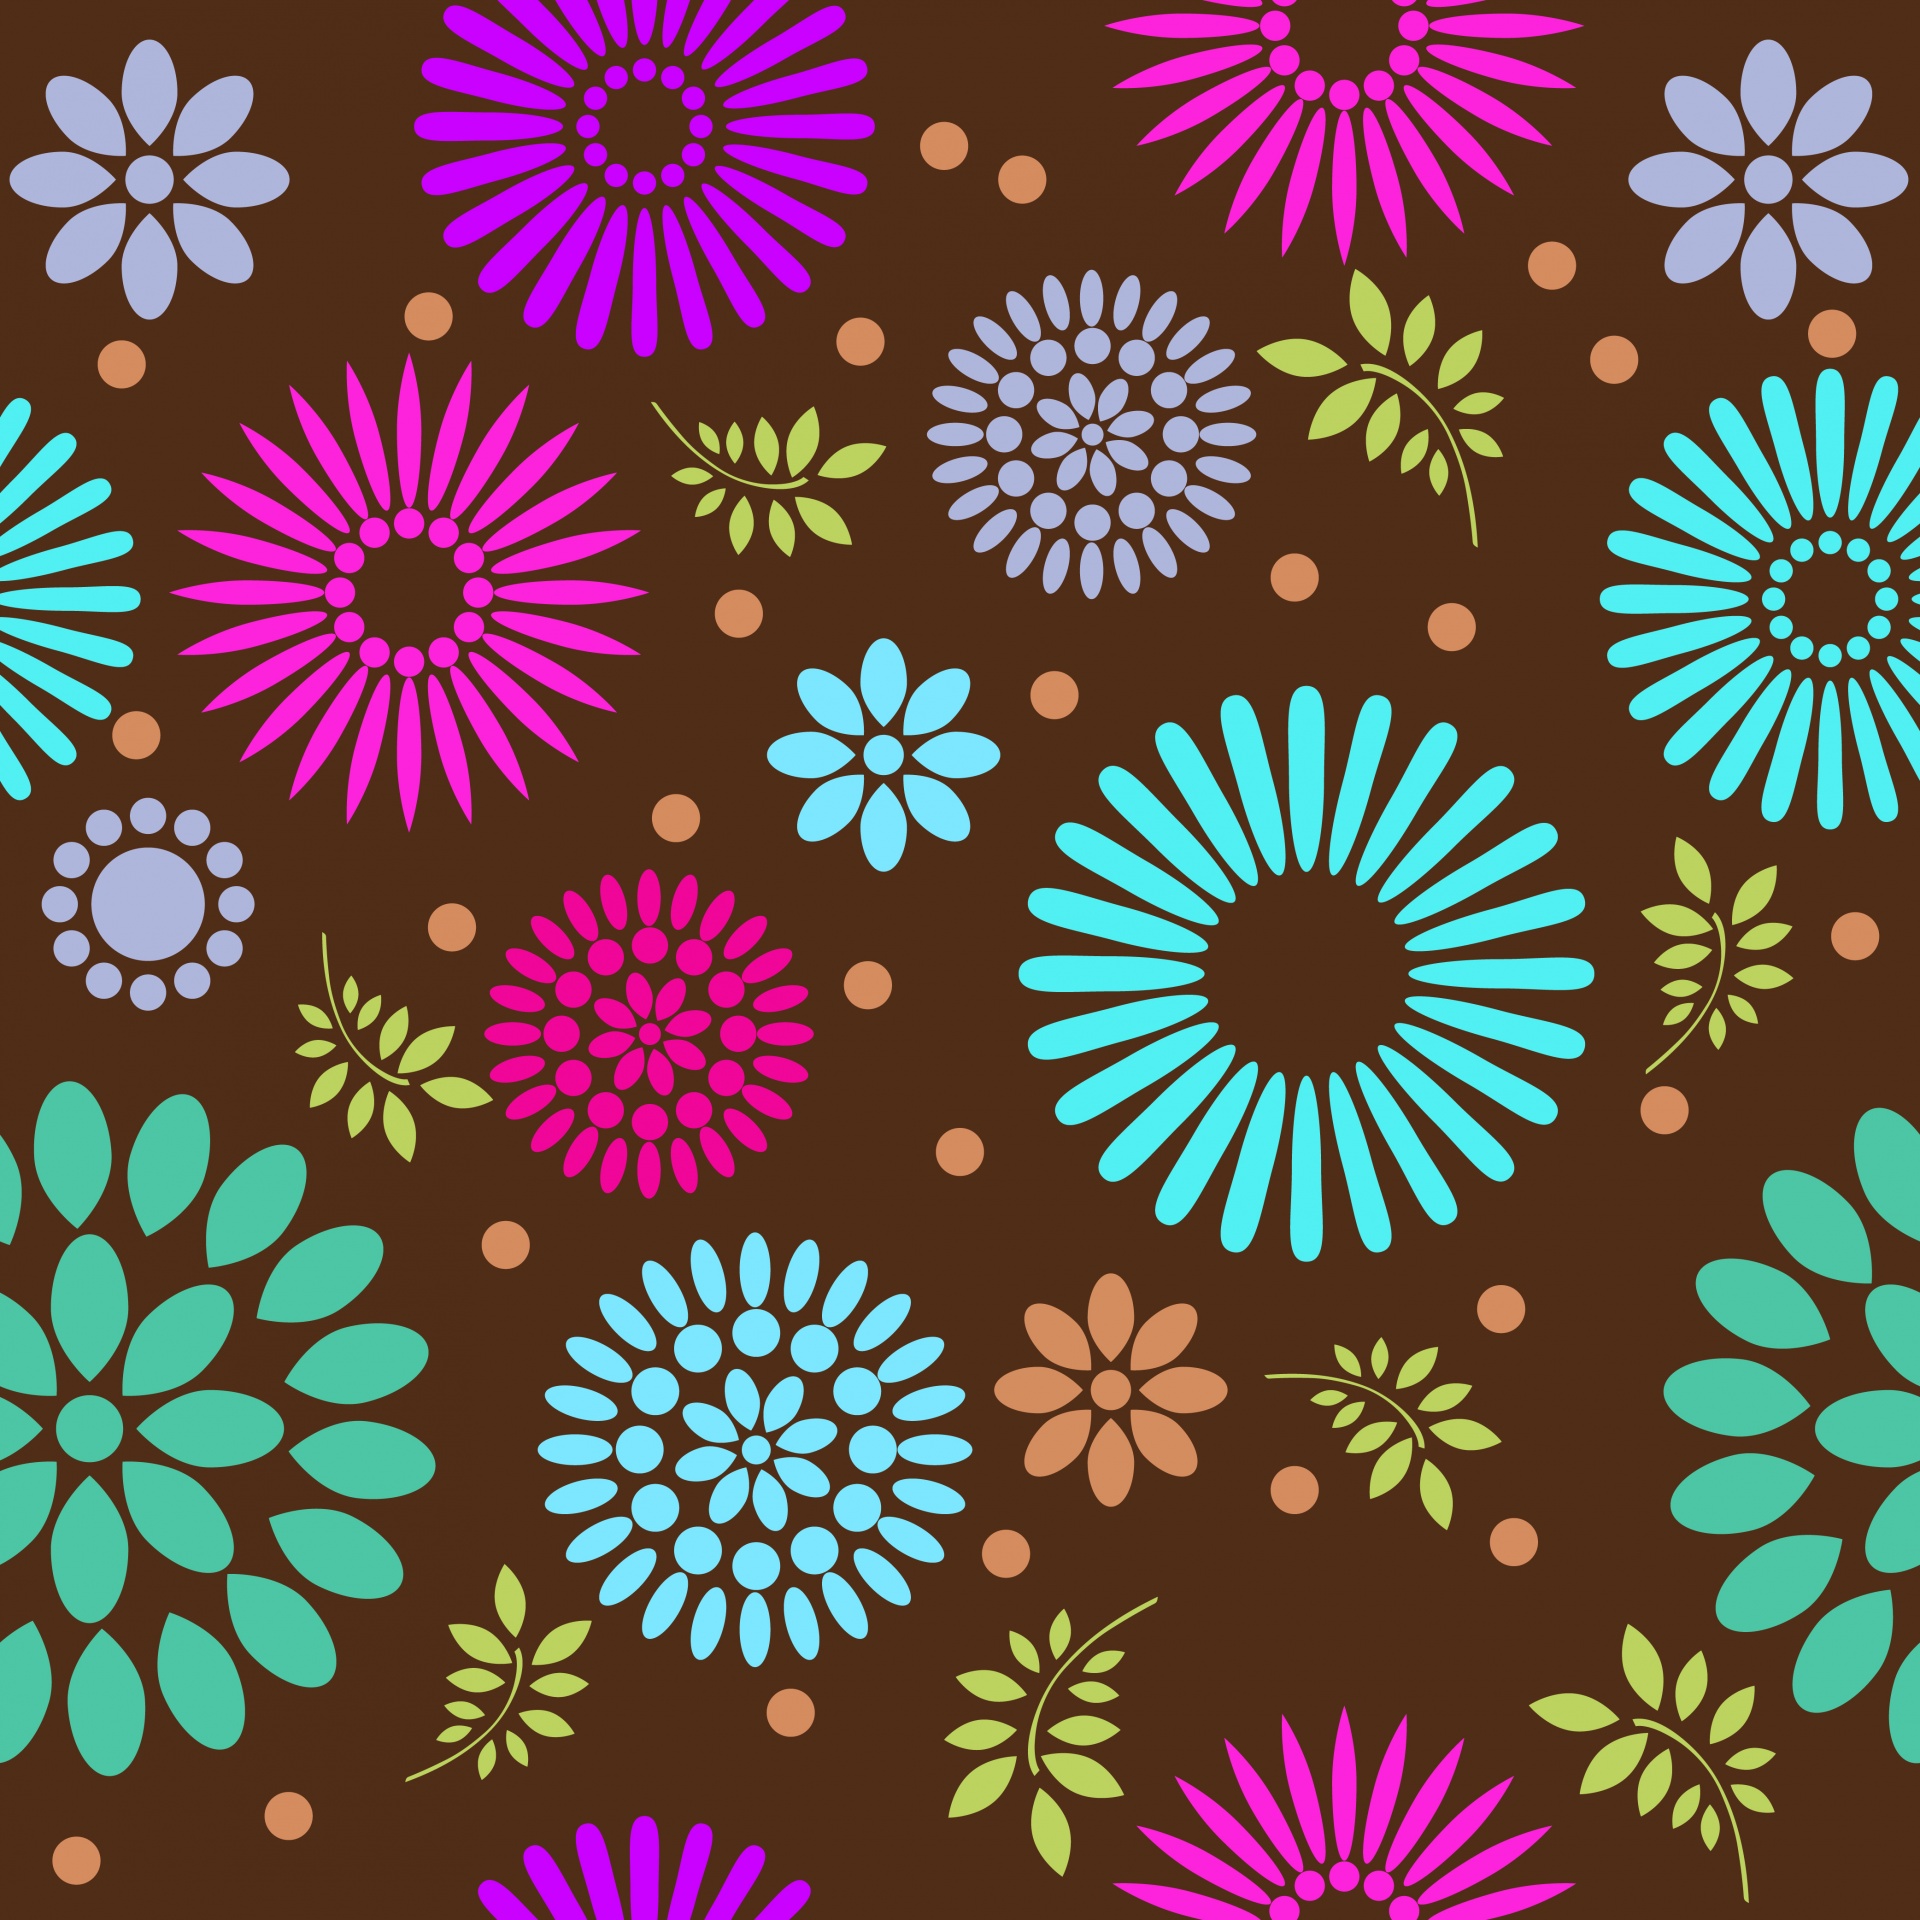 Colorful retro style floral wallpaper pattern seamless background